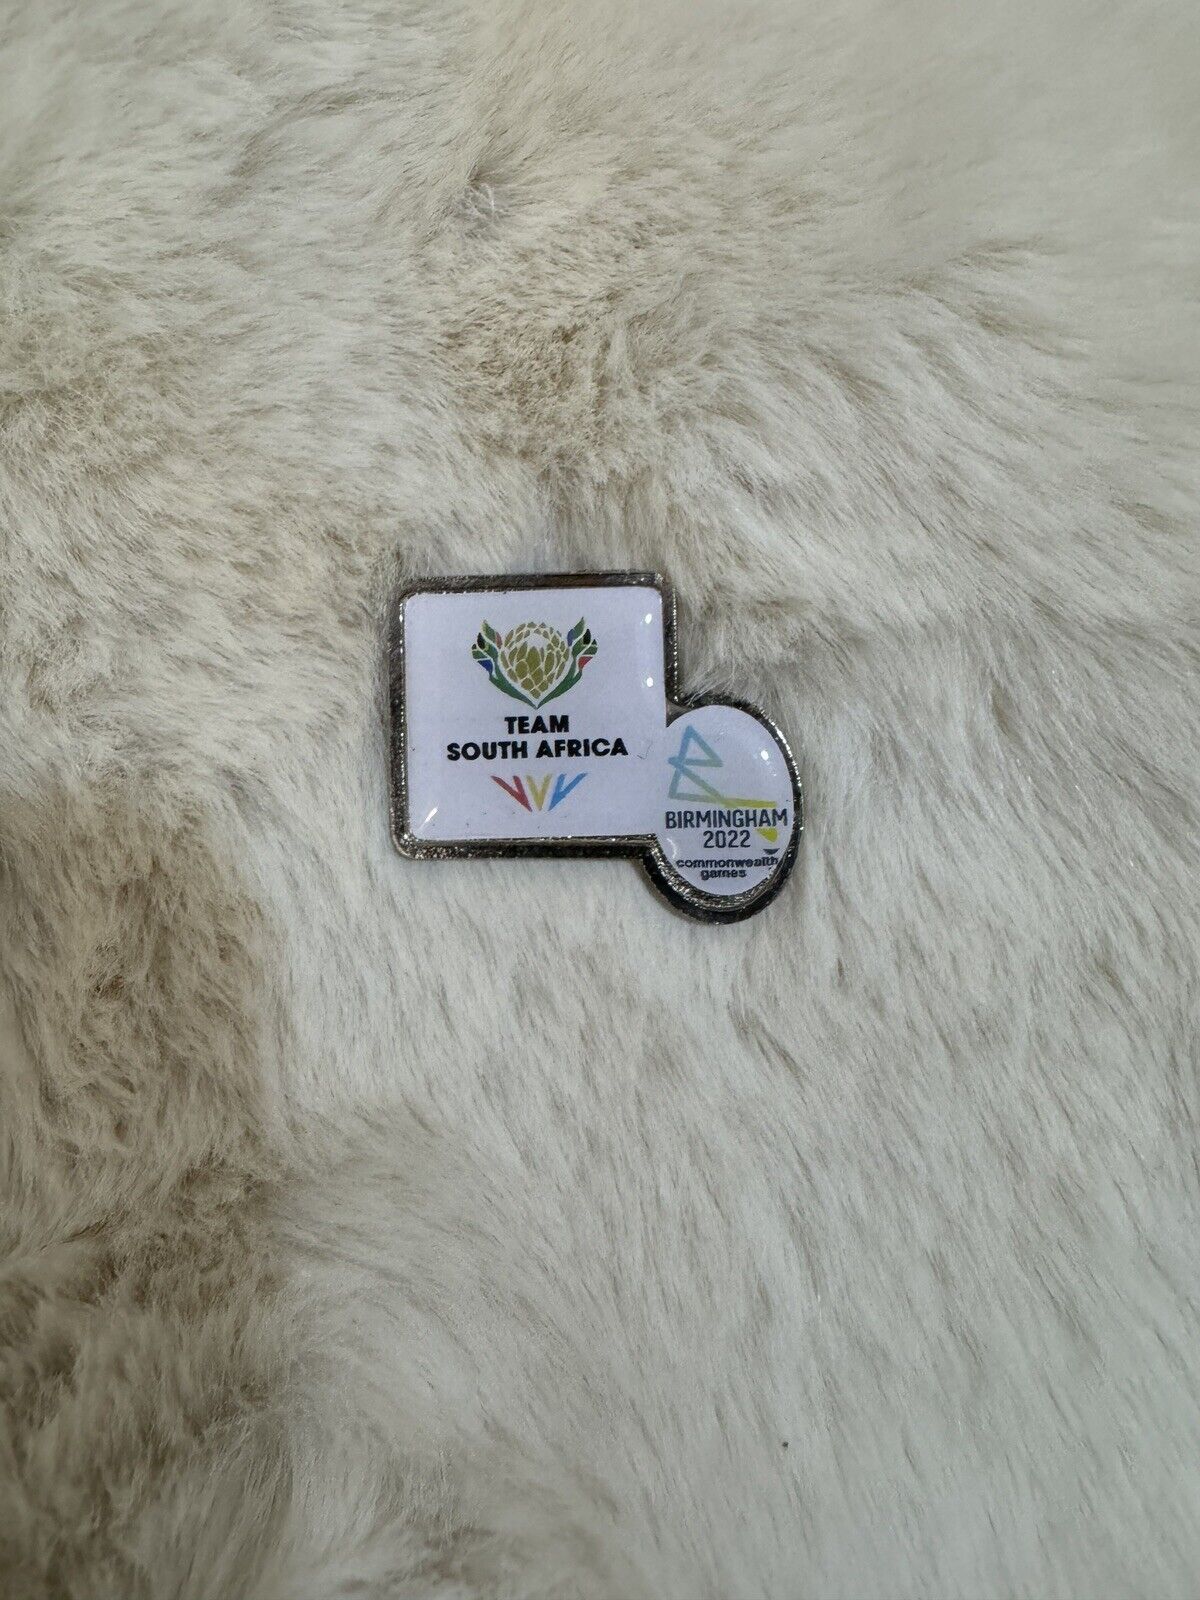 Birmingham 2022 Commonwealth Games South Africa Pin Badge Collector Item